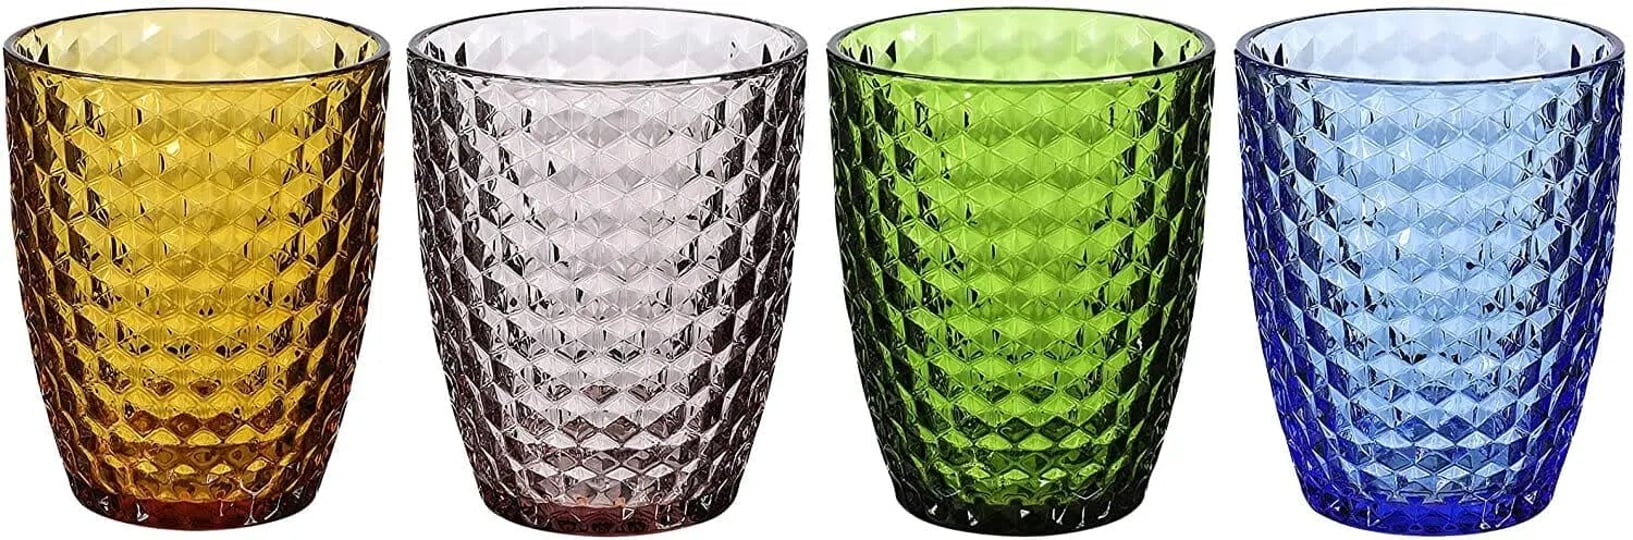 whole-housewares-colored-tumblers-water-glasses-set-of-4-multi-colors-drinking-glasses-12-oz-1